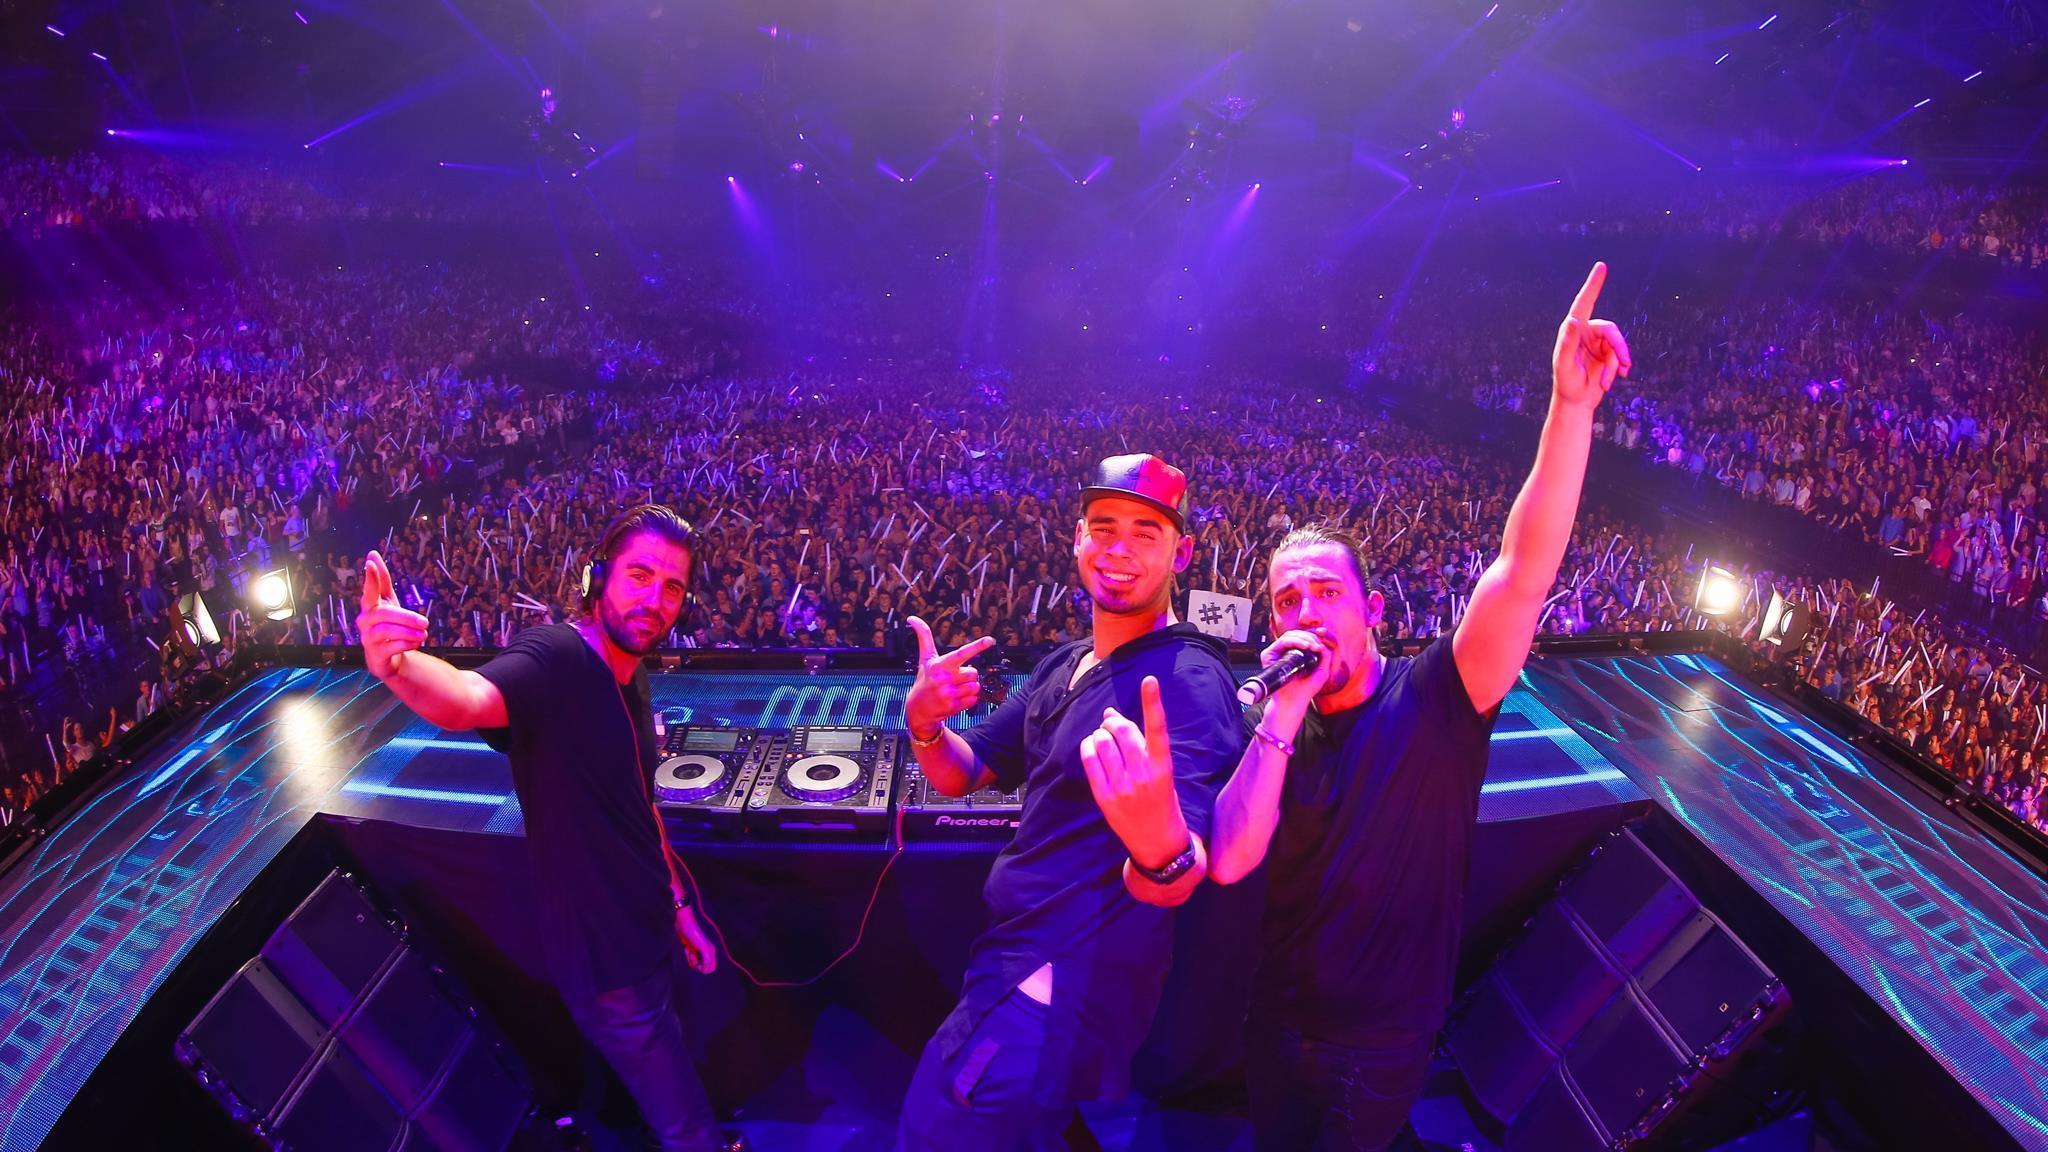 Dimitri Vegas & Like Mike Team Up With Afrojack Again - 'Hands Up